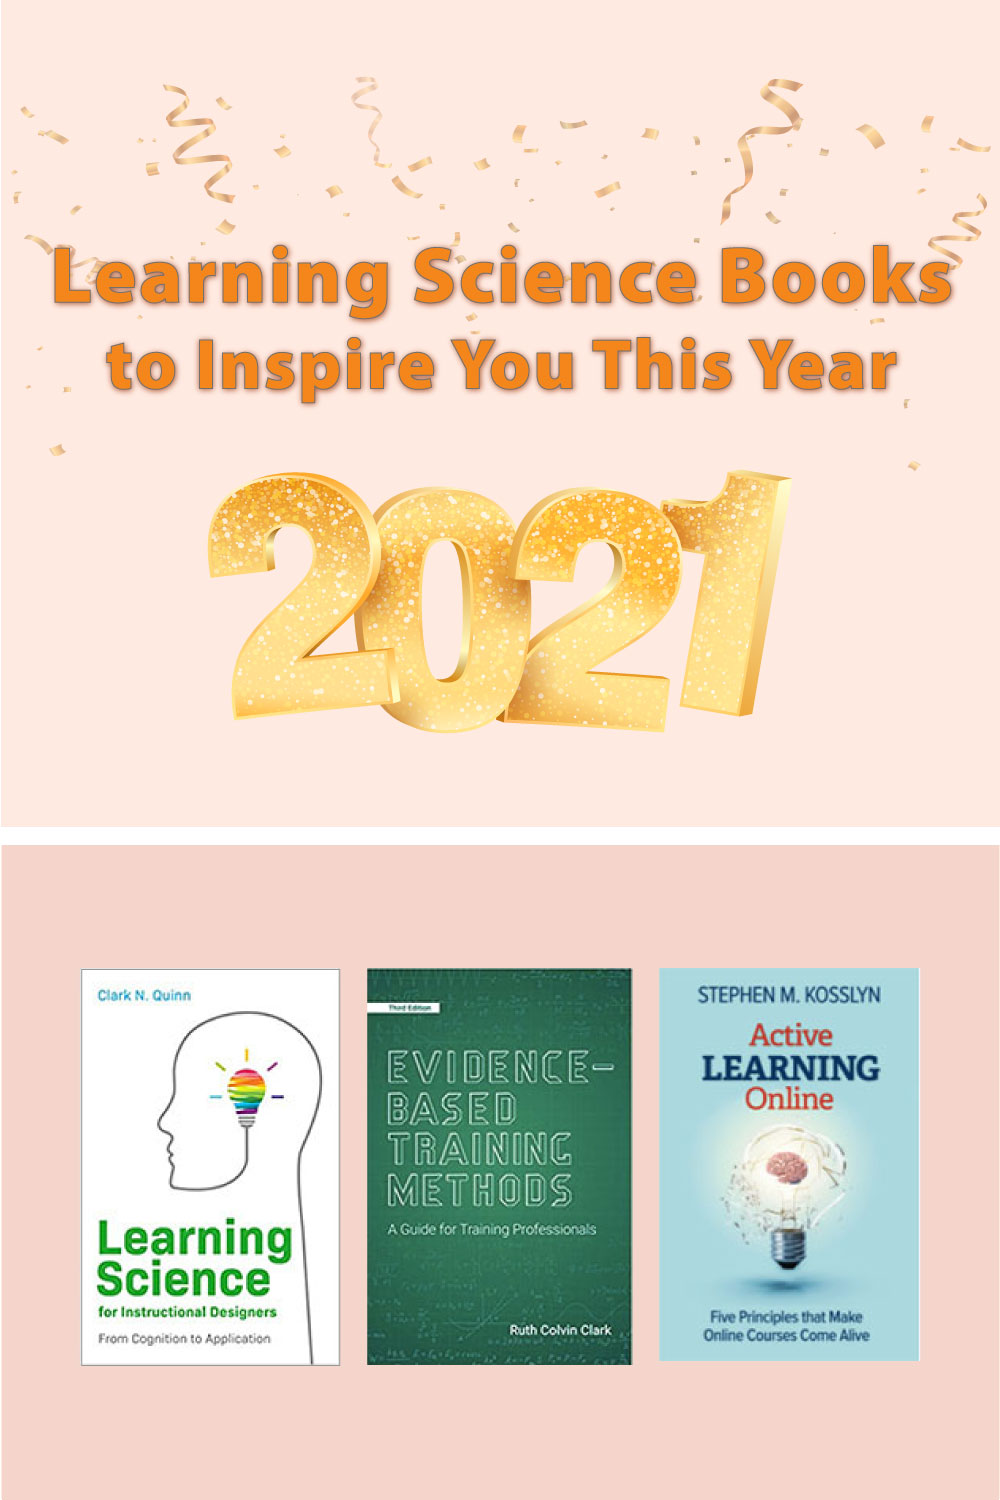 Learning Science Books to Inspire You This Year